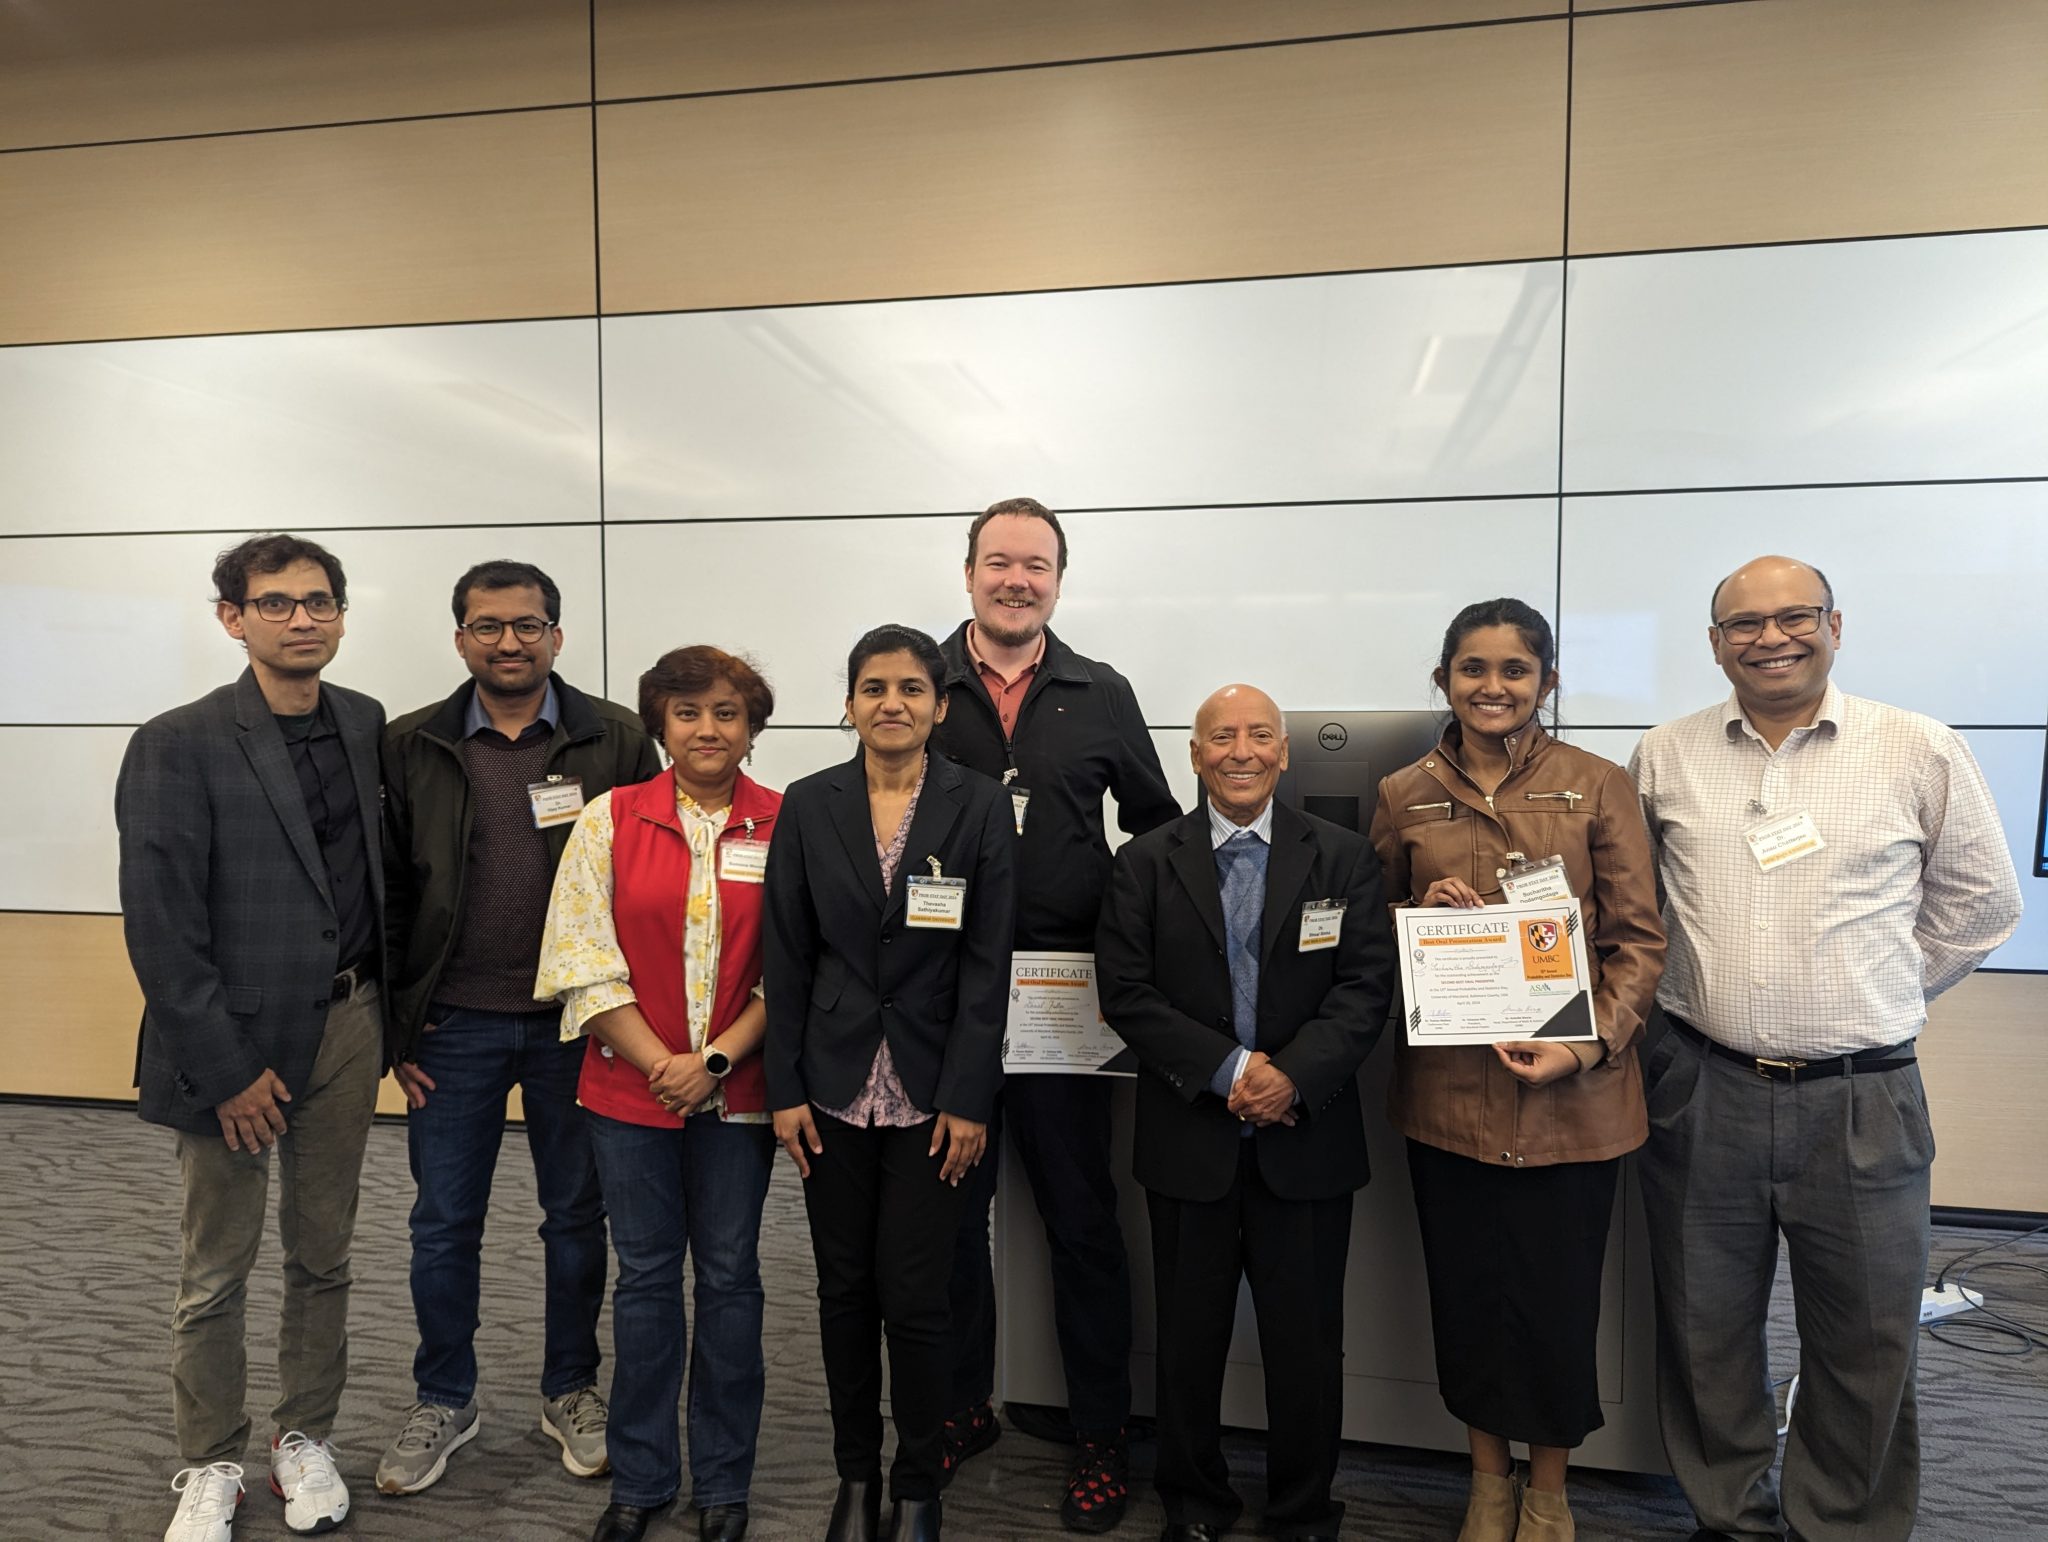 Mathematics PhD candidates Daniel Fuller, Thevasha Sathiyakumar, and Sucharitha Dodamgodage win awards for work on microbiome analysis at the University of Maryland's 15th Annual Probability and Statistics Day.